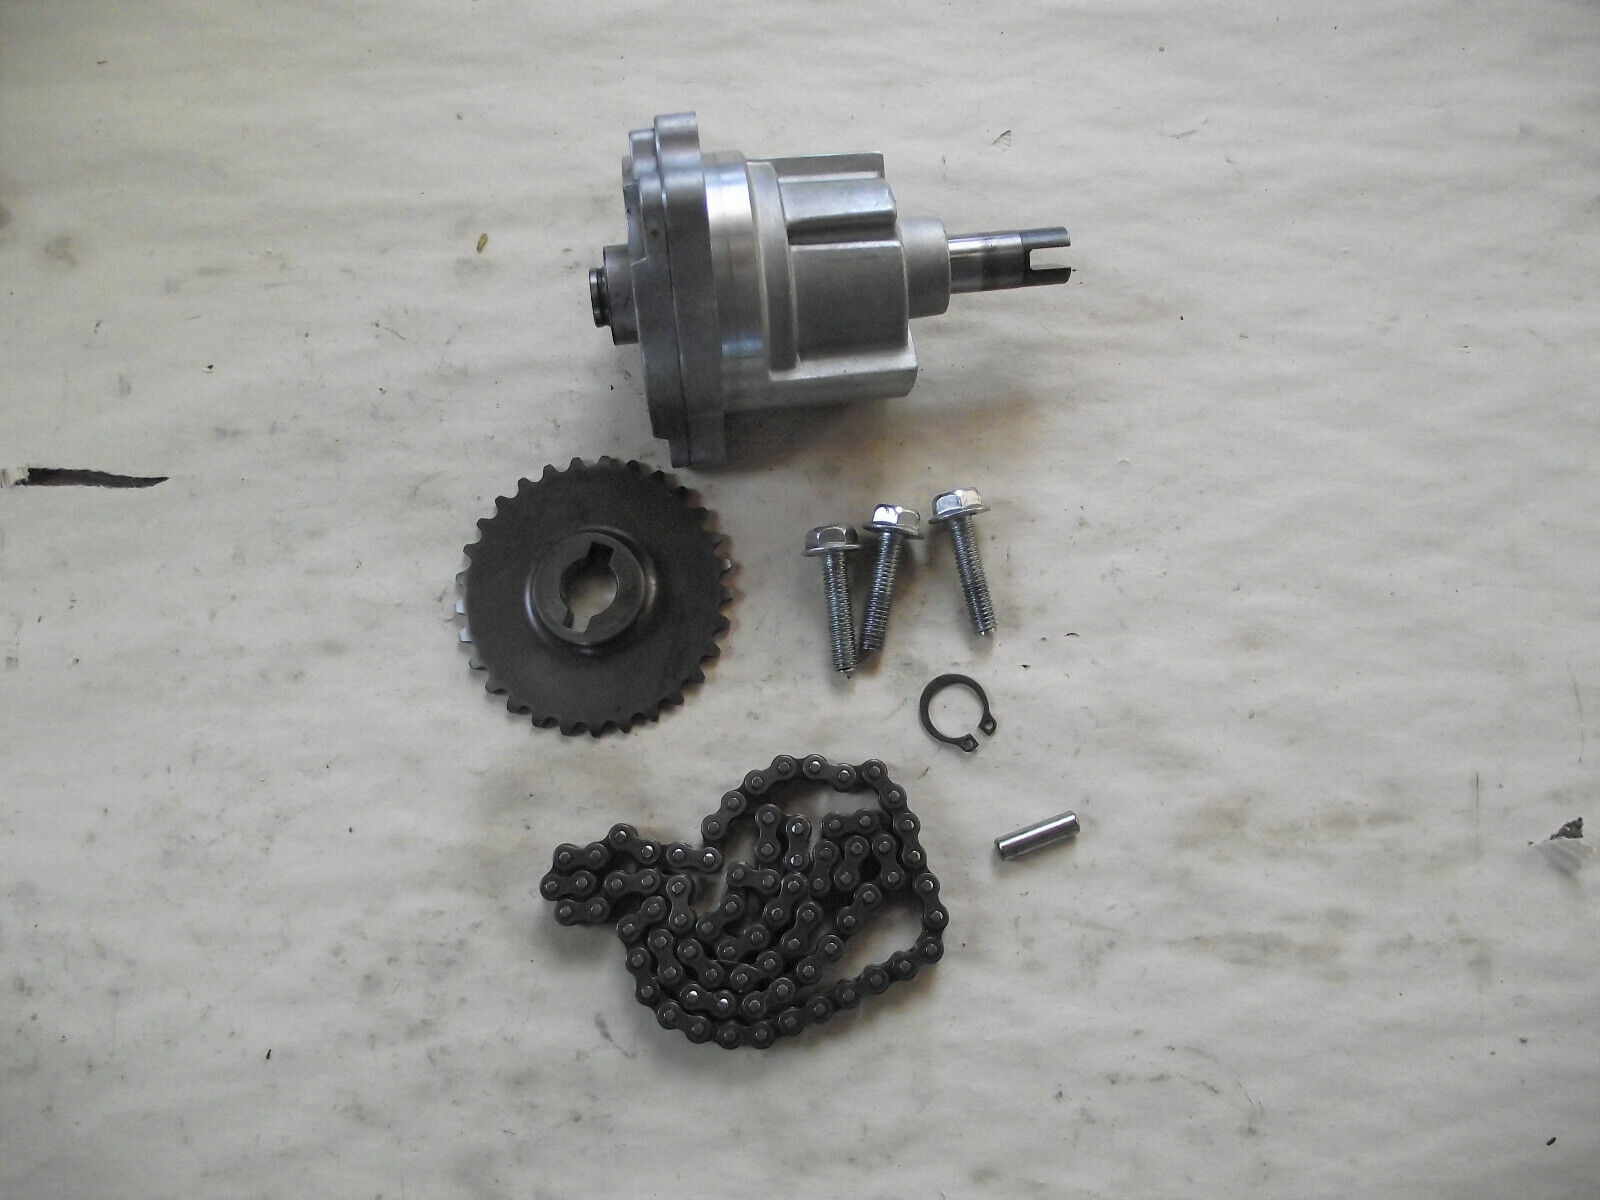 1993 SUZUKI INTRUDER 800 VS800 Oil Pump Assembly with Gear and C